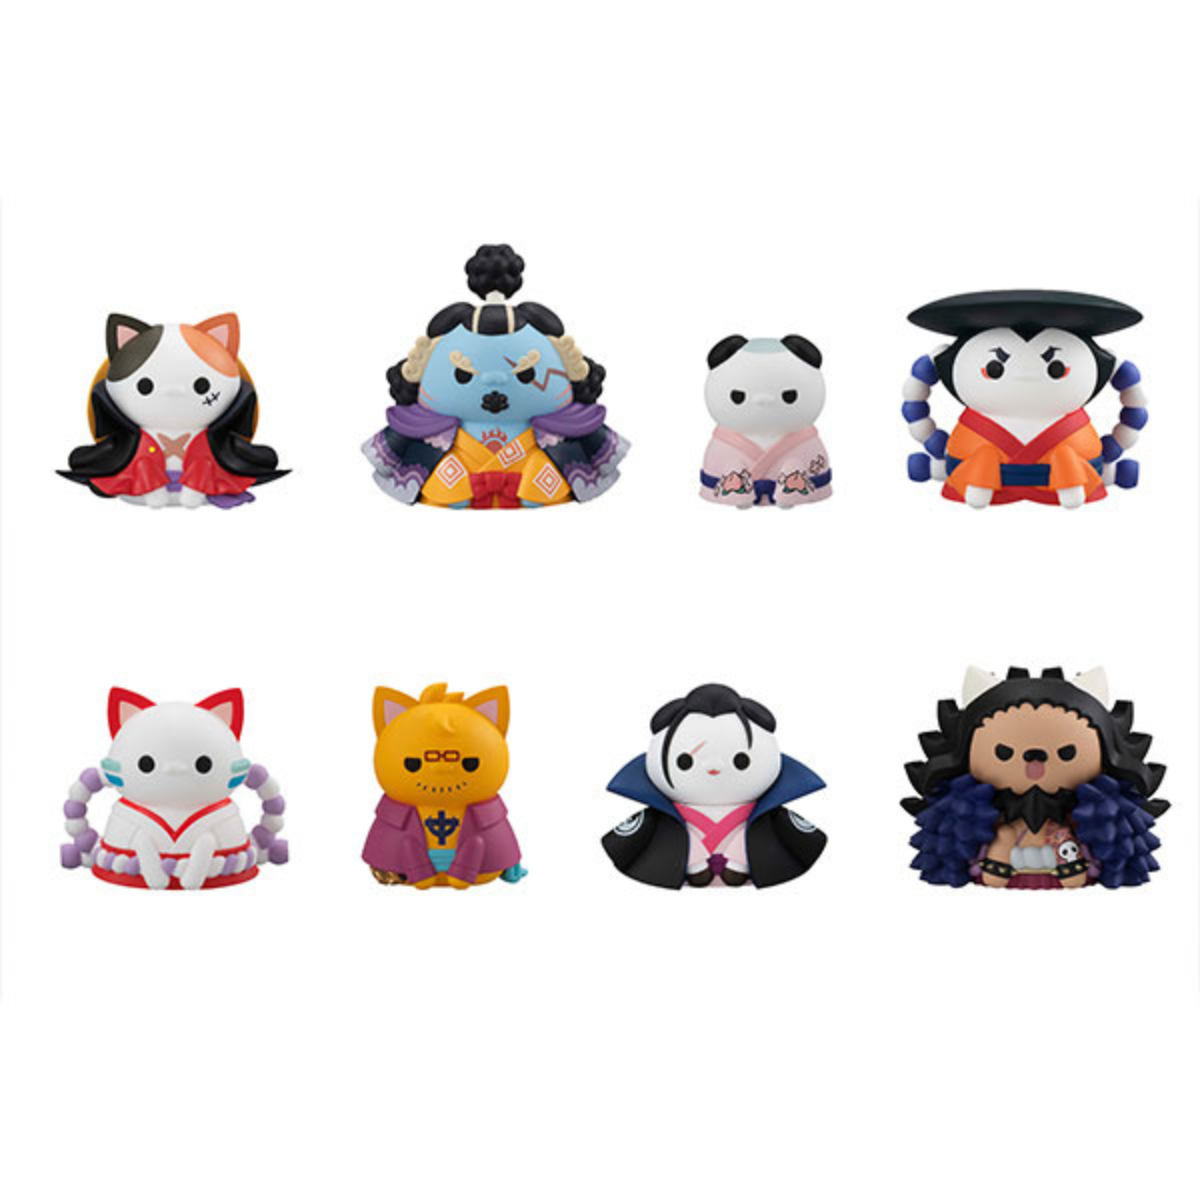 ONE PIECE MEGA CAT PROJECT "Luffy in Wano Kuni" (Nyan Piece Nyan! ver.) (Repeat) (SET of 8pcs)-Display Box (8pcs)-MegaHouse-Ace Cards & Collectibles